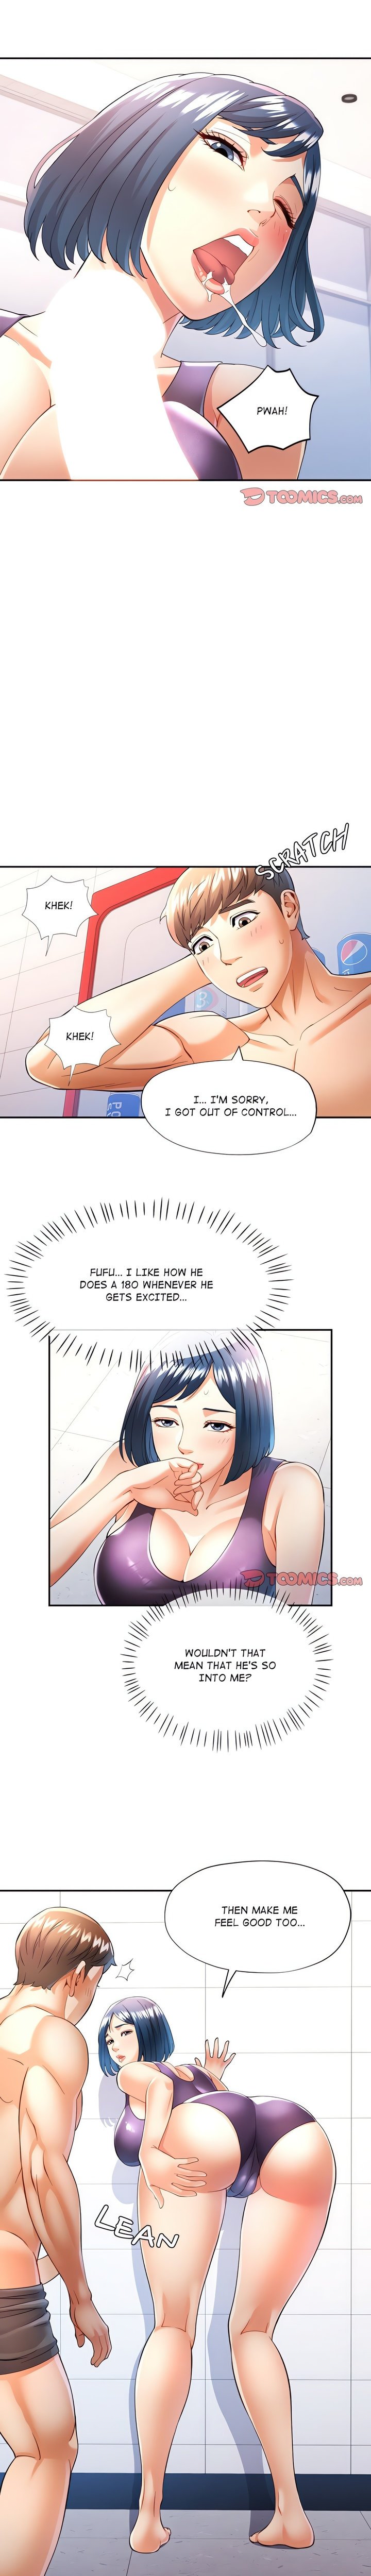 in-her-place-chap-28-3